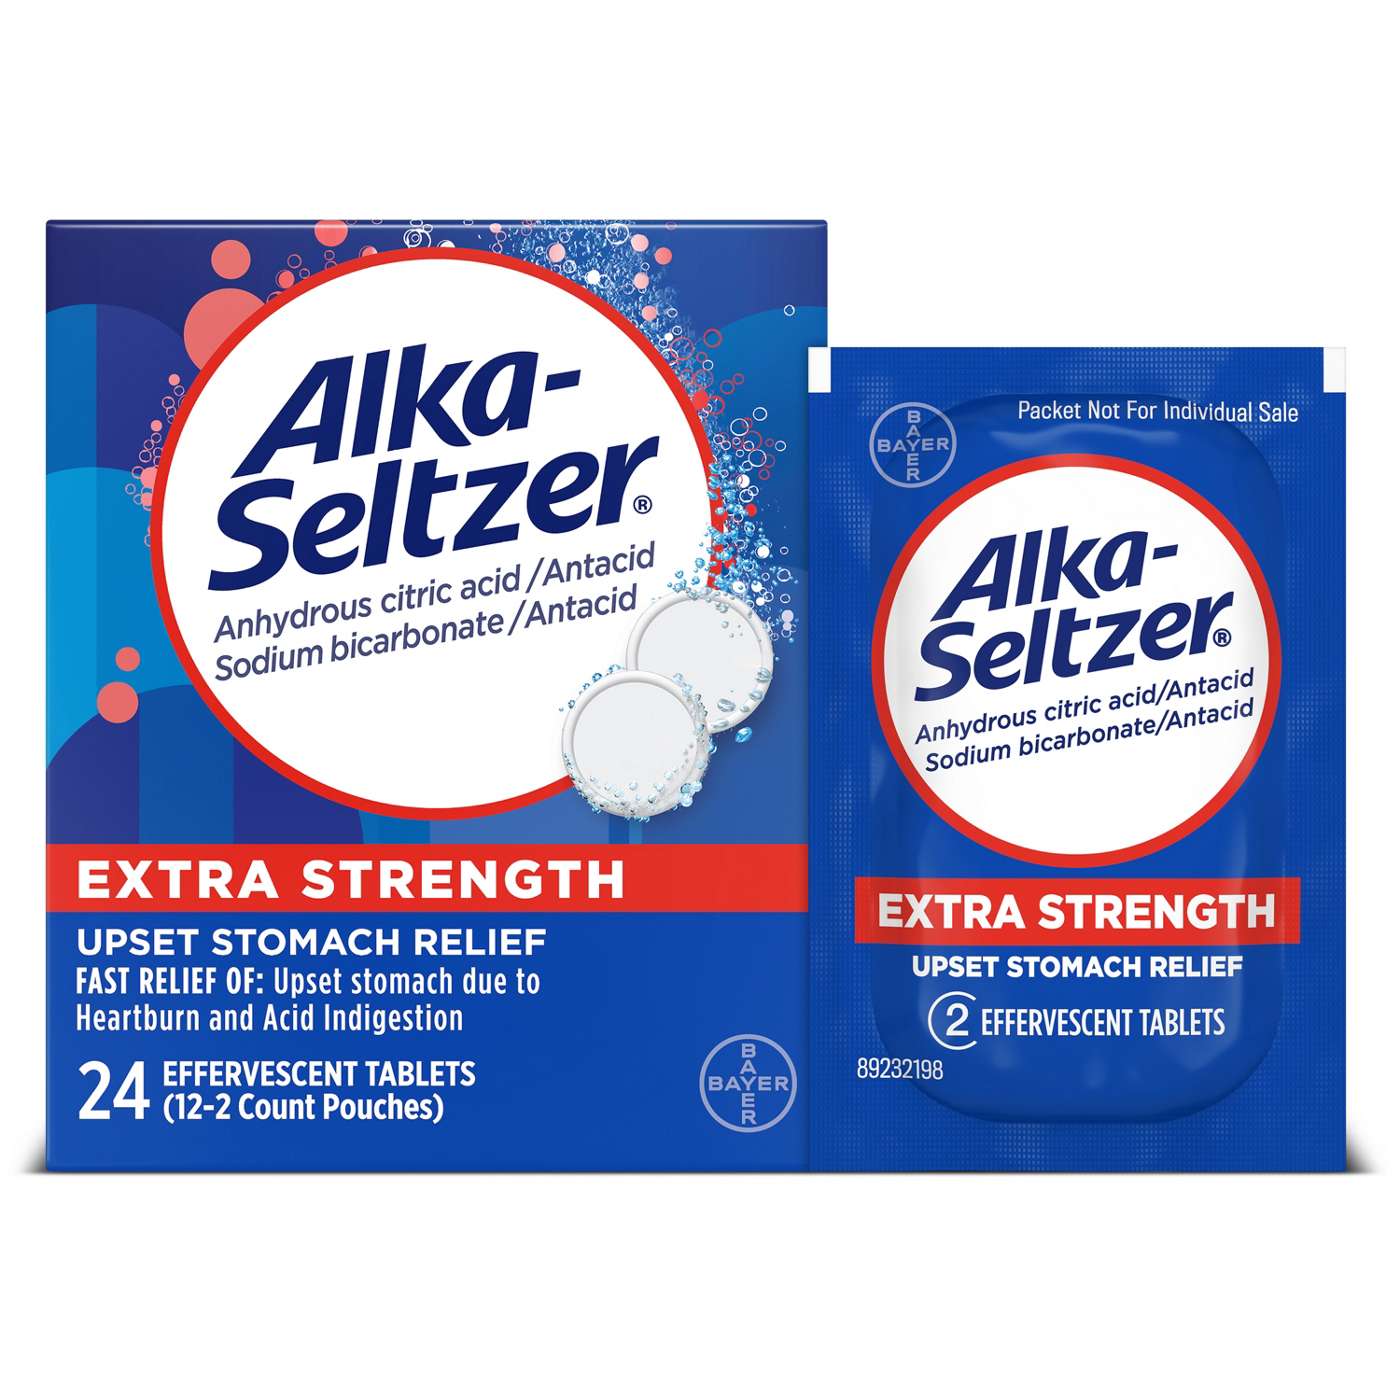 Alka-Seltzer Extra Strength Tablets; image 6 of 9